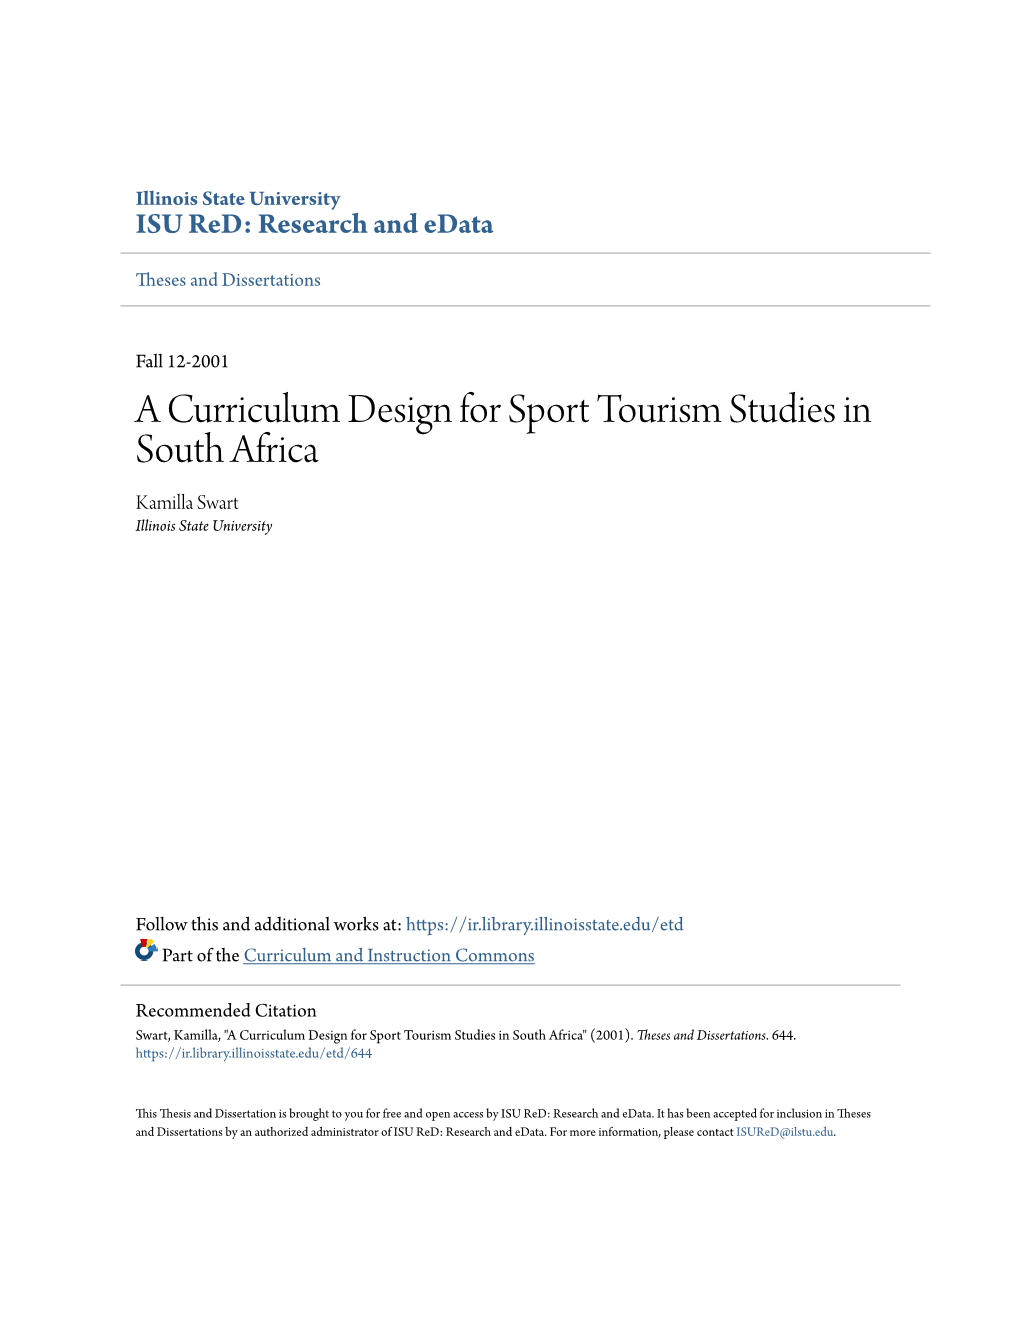 A Curriculum Design for Sport Tourism Studies in South Africa Kamilla Swart Illinois State University